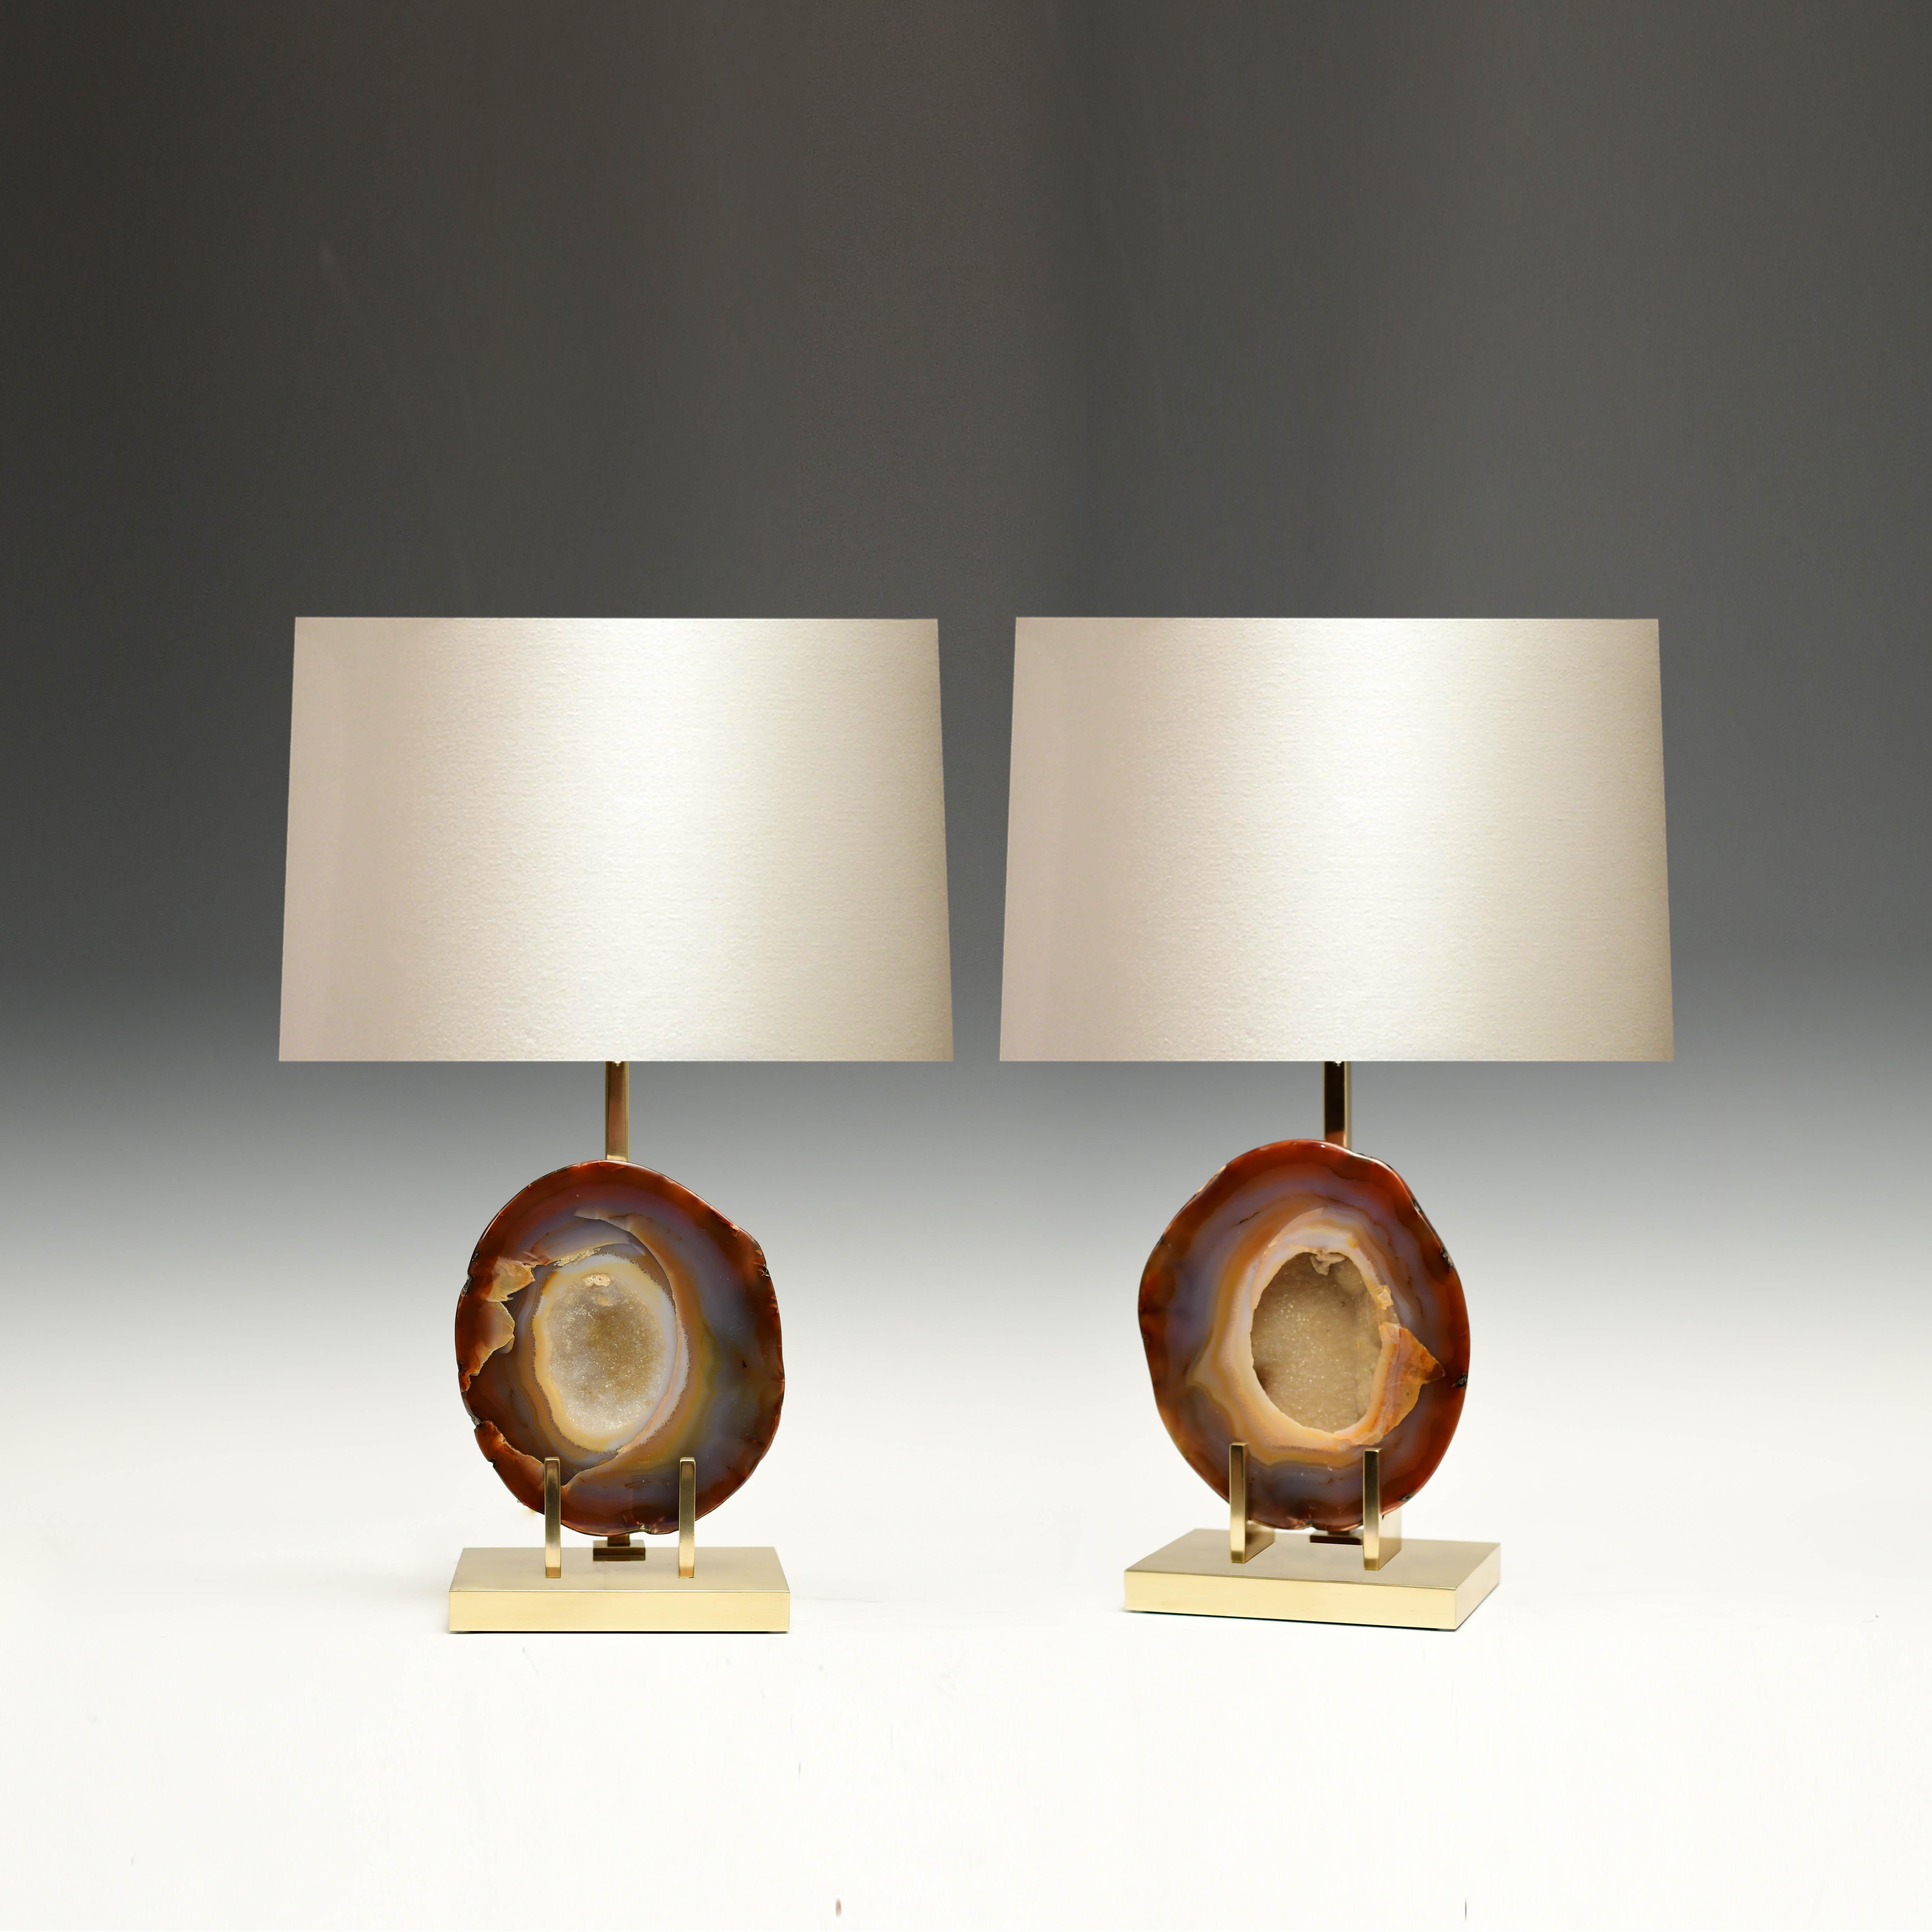 Pair of rare natural agate mounts as lamps with polish brass finish stand, created by Phoenix Gallery.
(Lampshade not included).